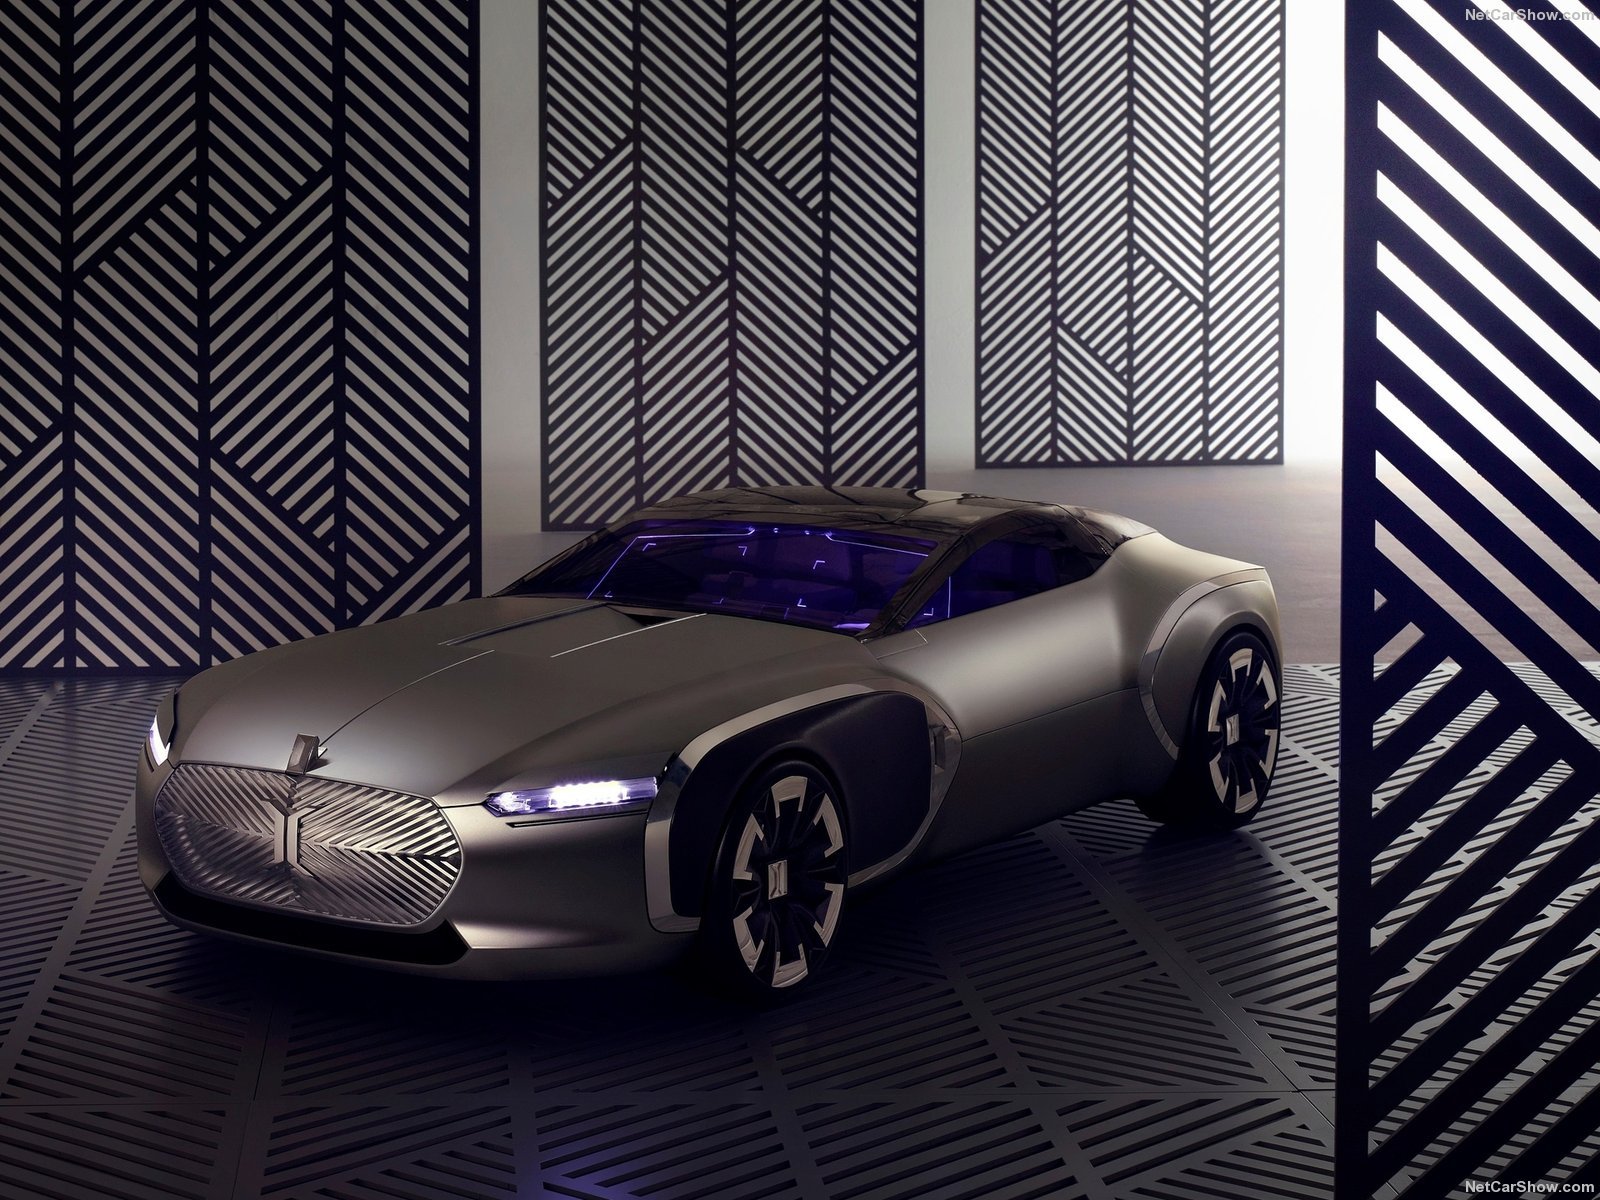 2015, Breaks, Cars, Concept, Corbusier, Coupe, Cover, Renault Wallpaper